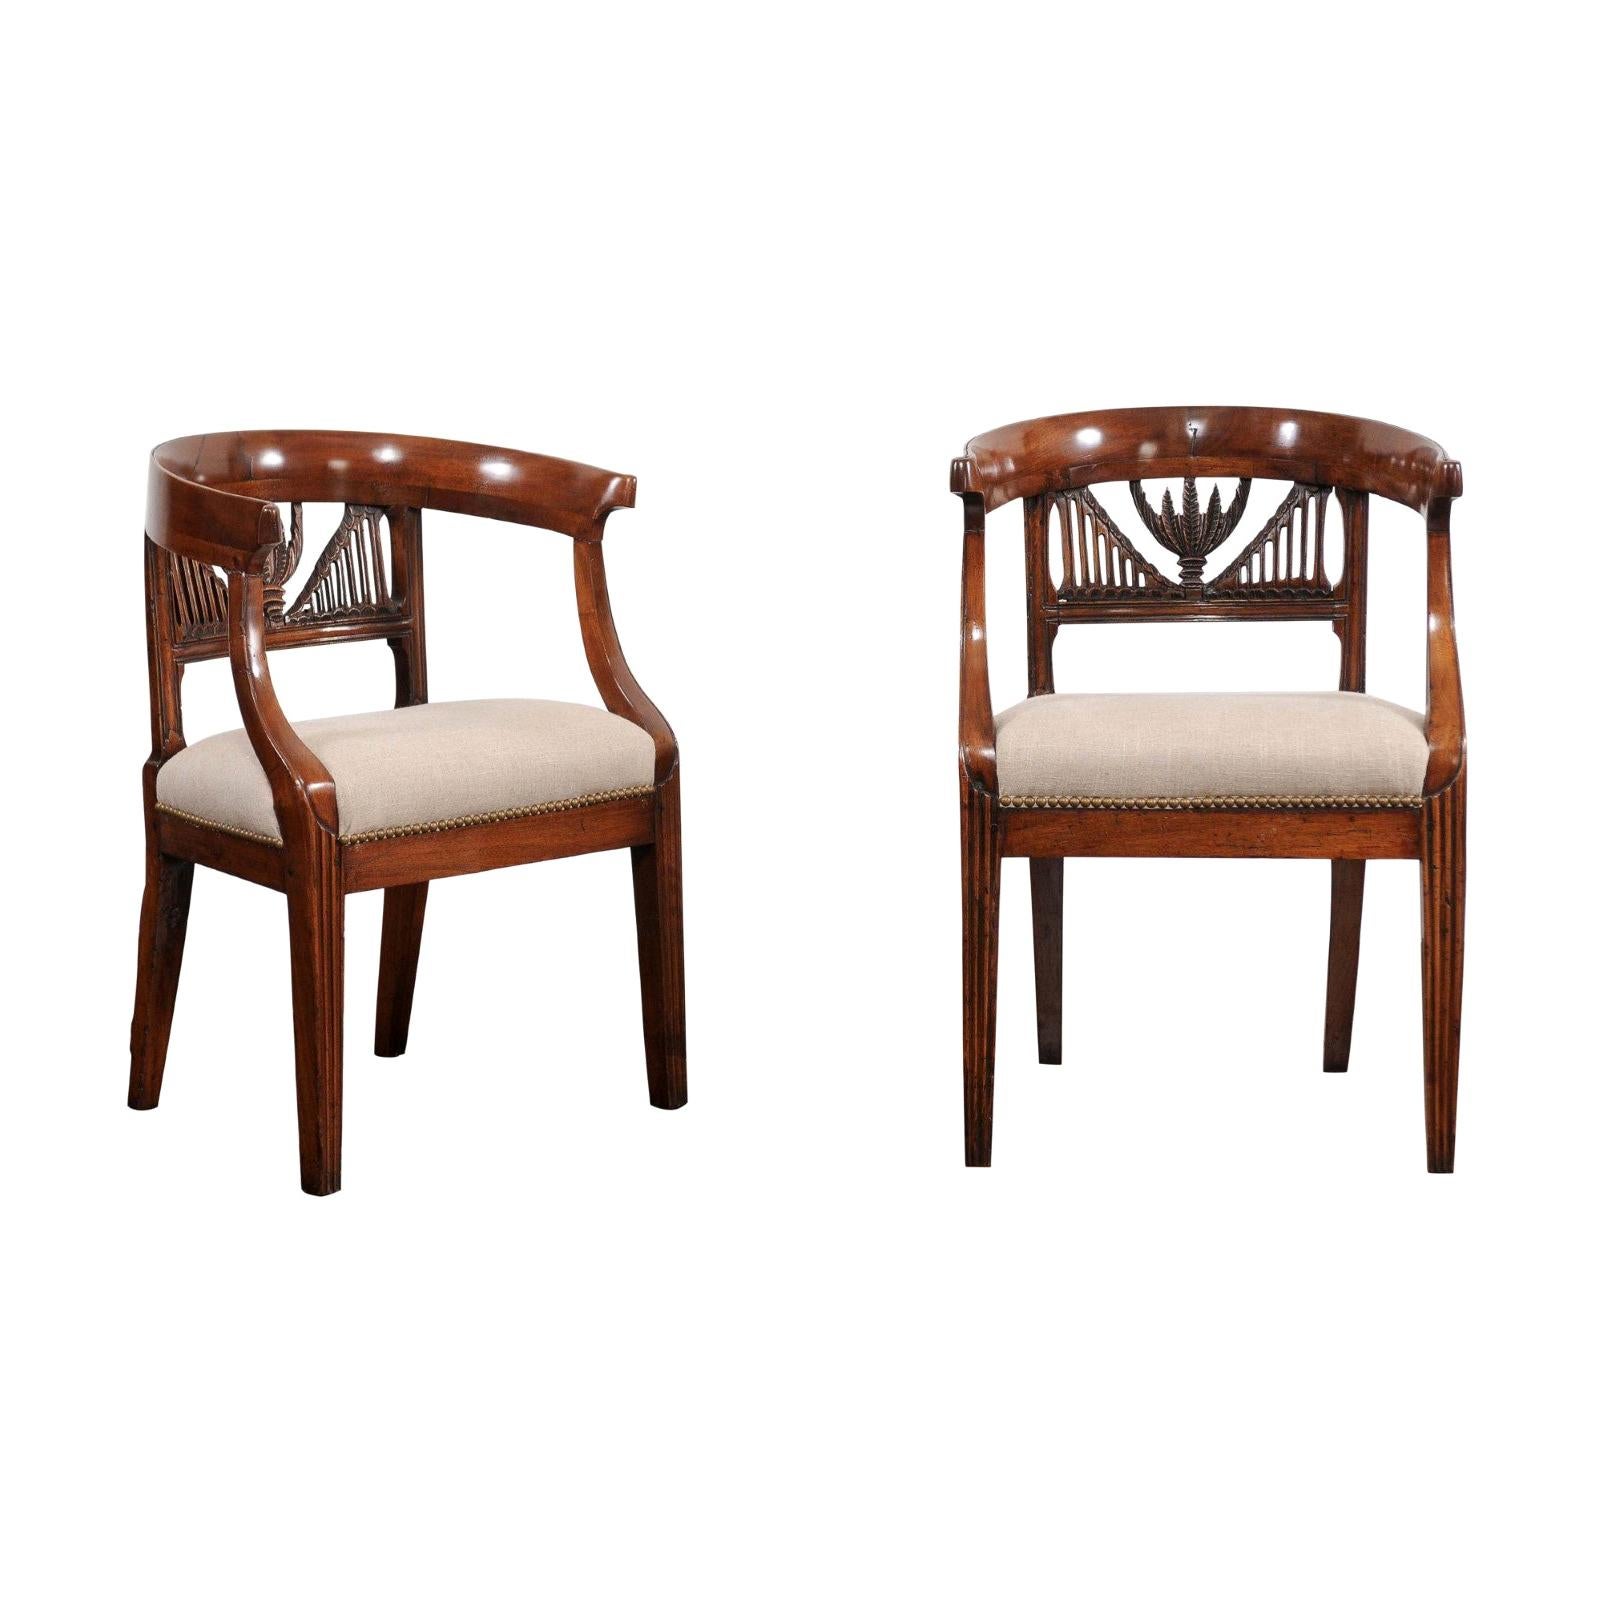 Two Italian 1800s Carved Walnut Upholstered Armchairs Sold Individually